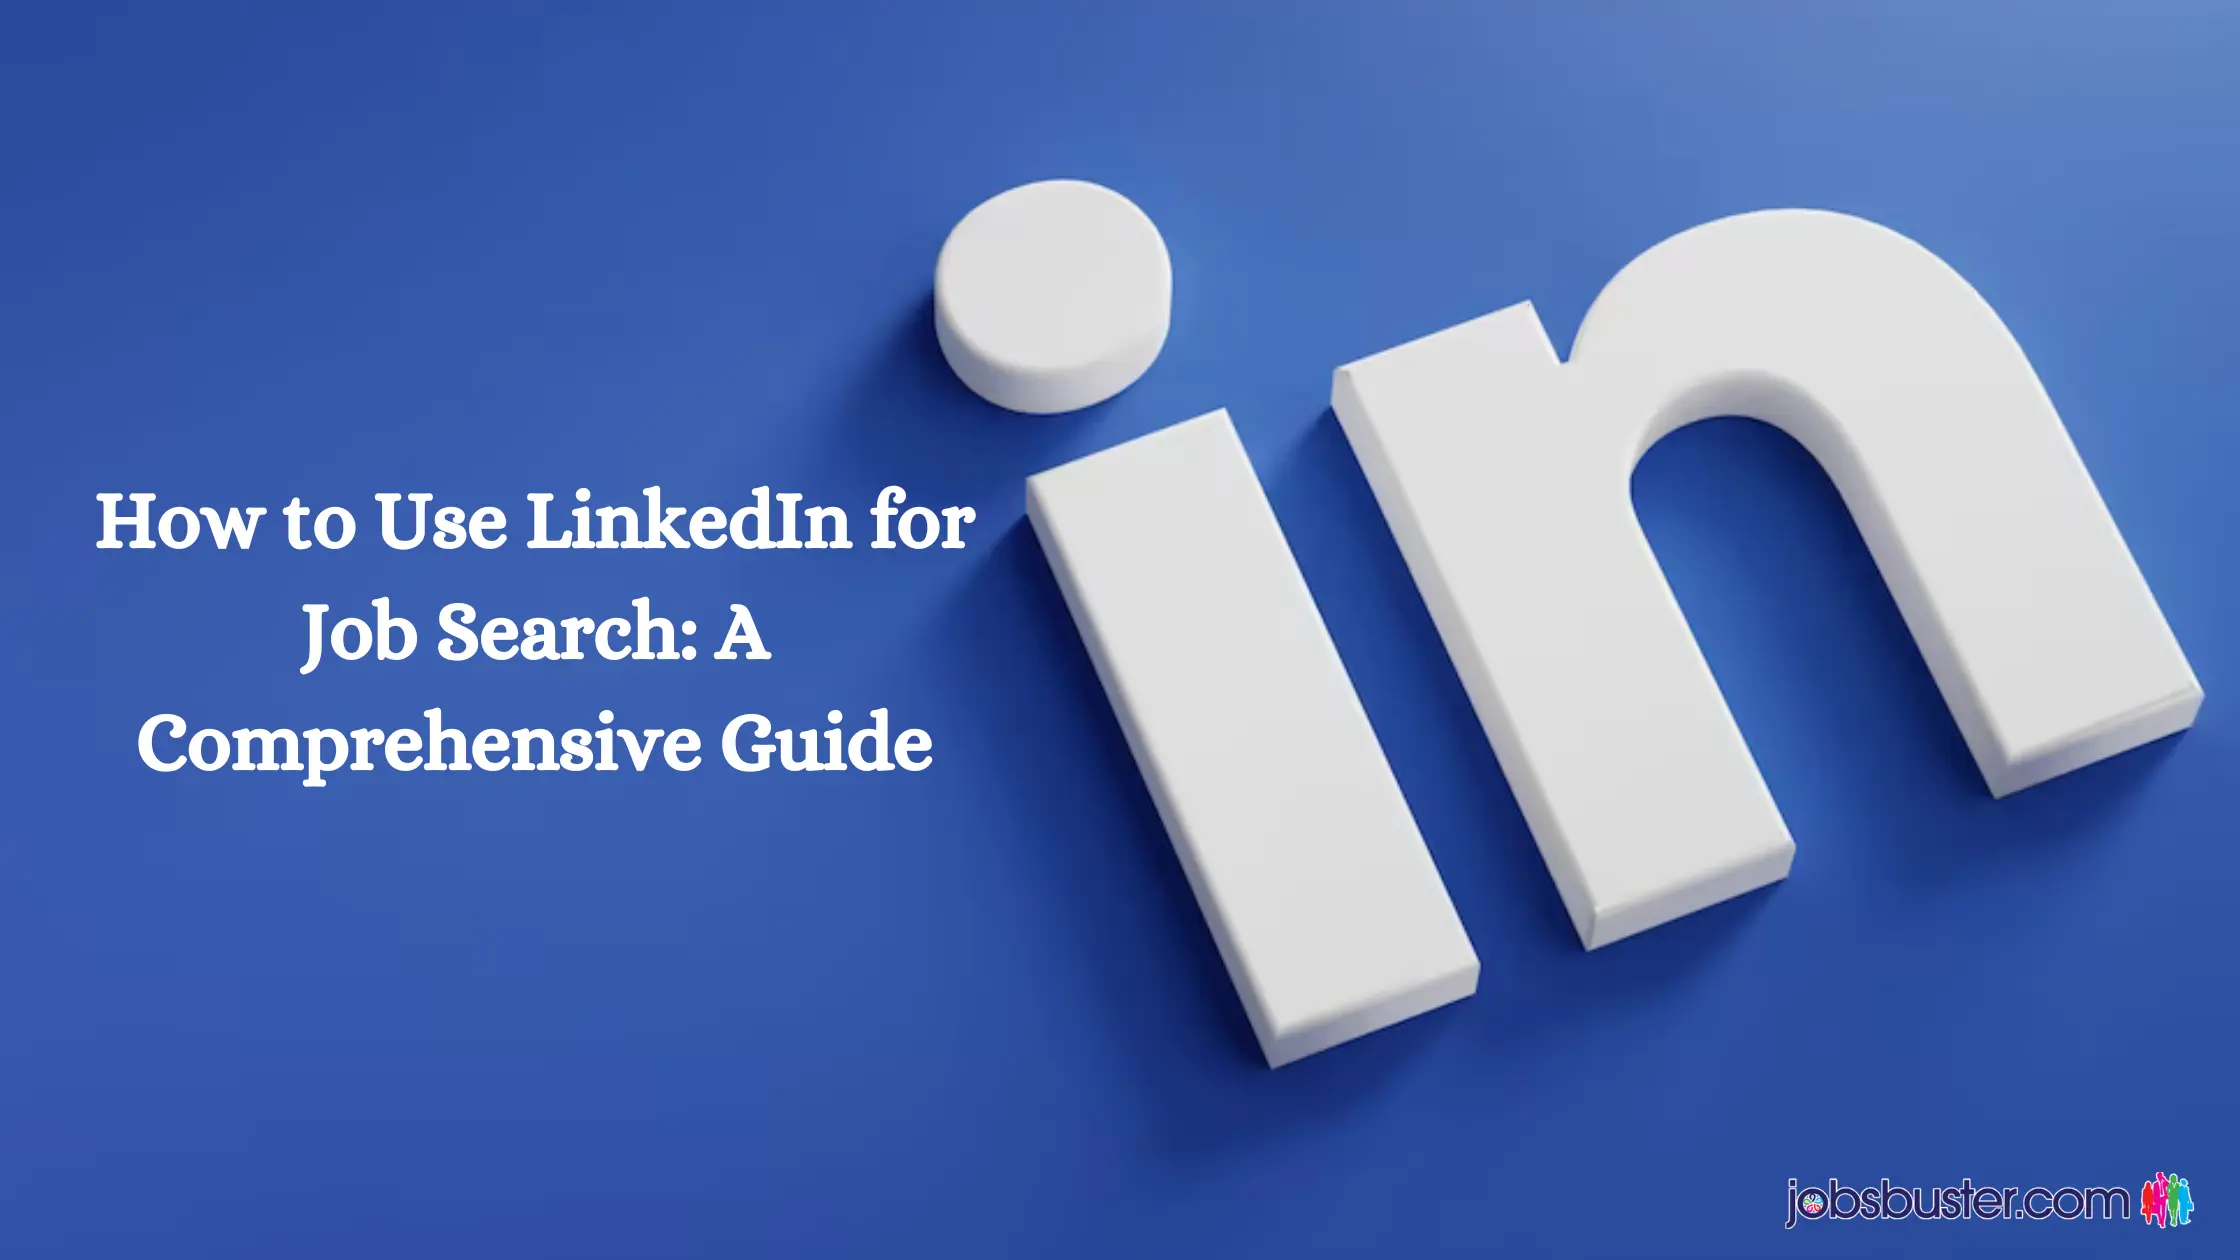 How to Use LinkedIn for Job Search: A Comprehensive Guide